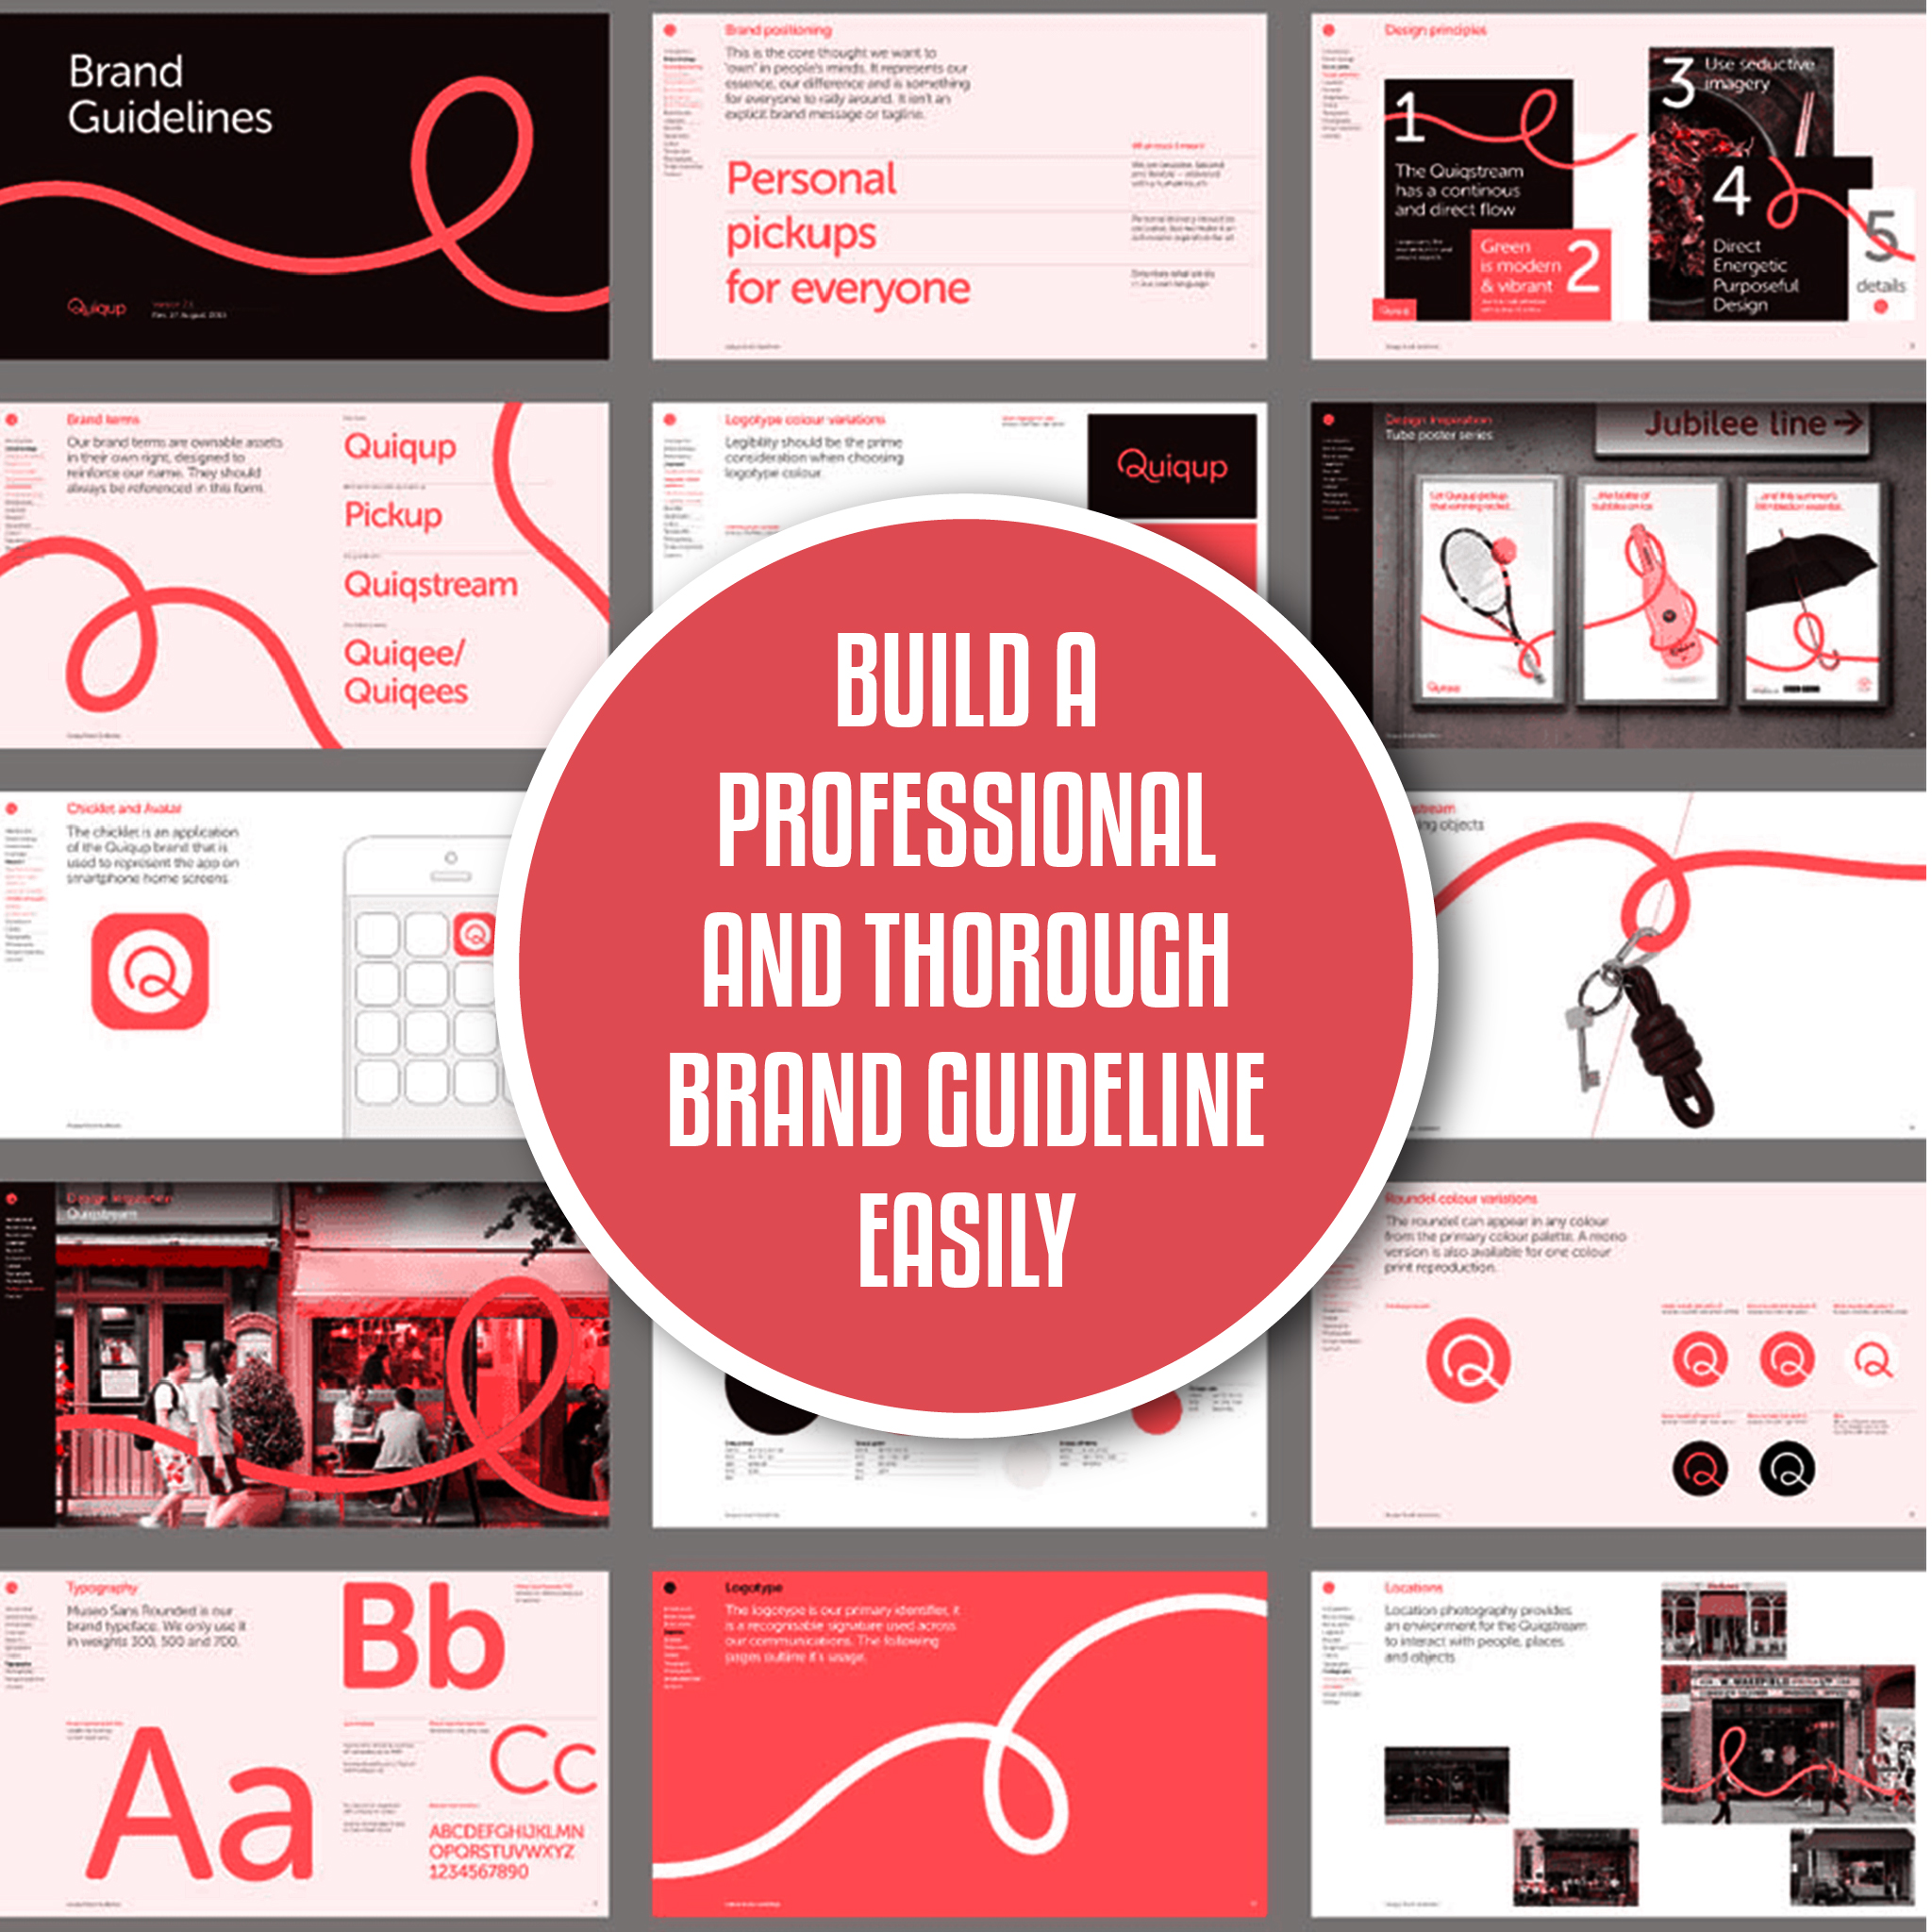 How to make a professional brand guideline?